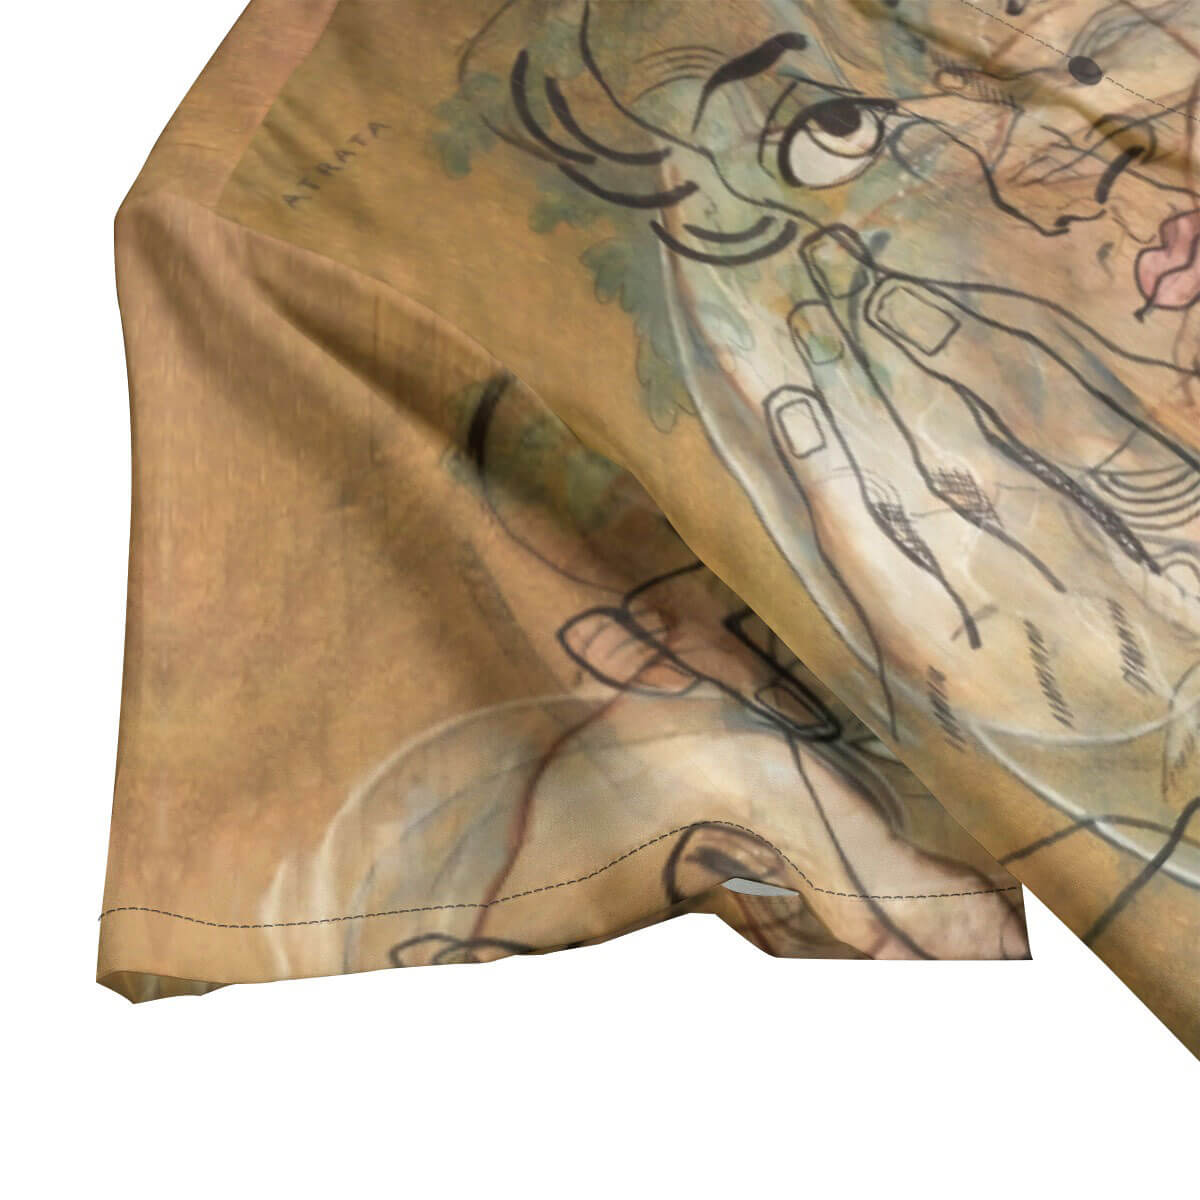 Close-up of mechanical design on Picabia-inspired aloha shirt